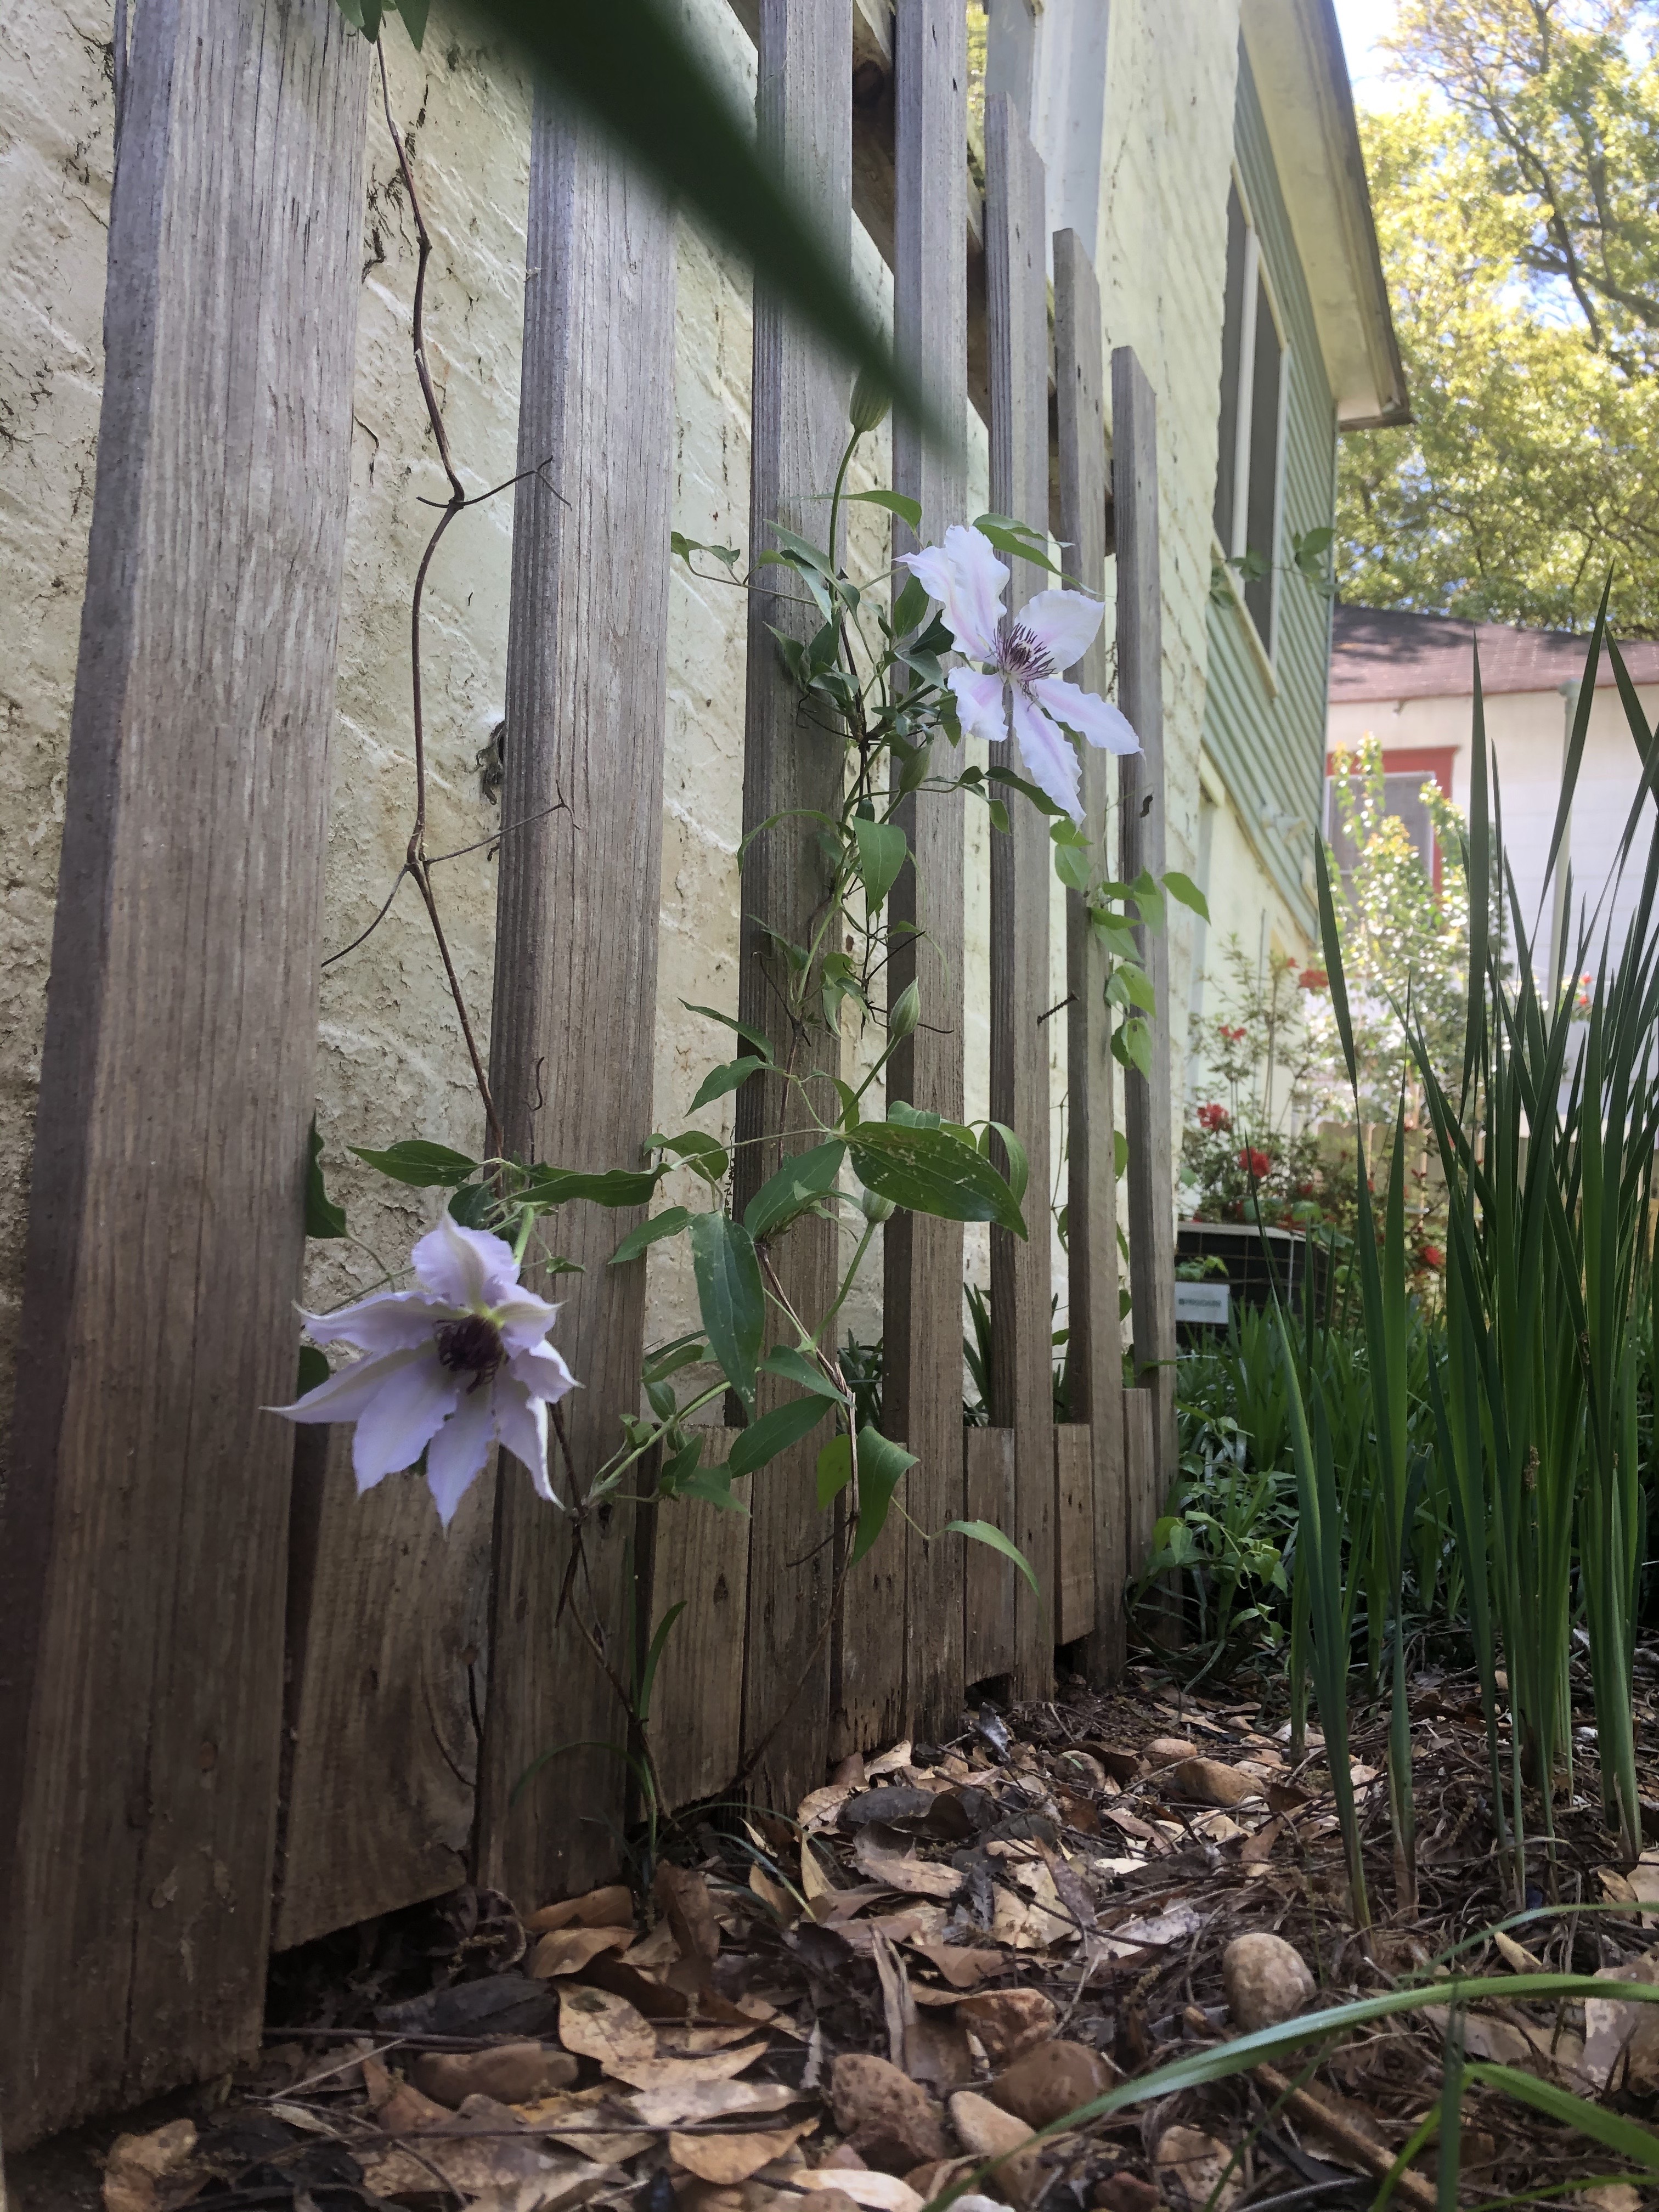 Clematis vine with multiple flowers